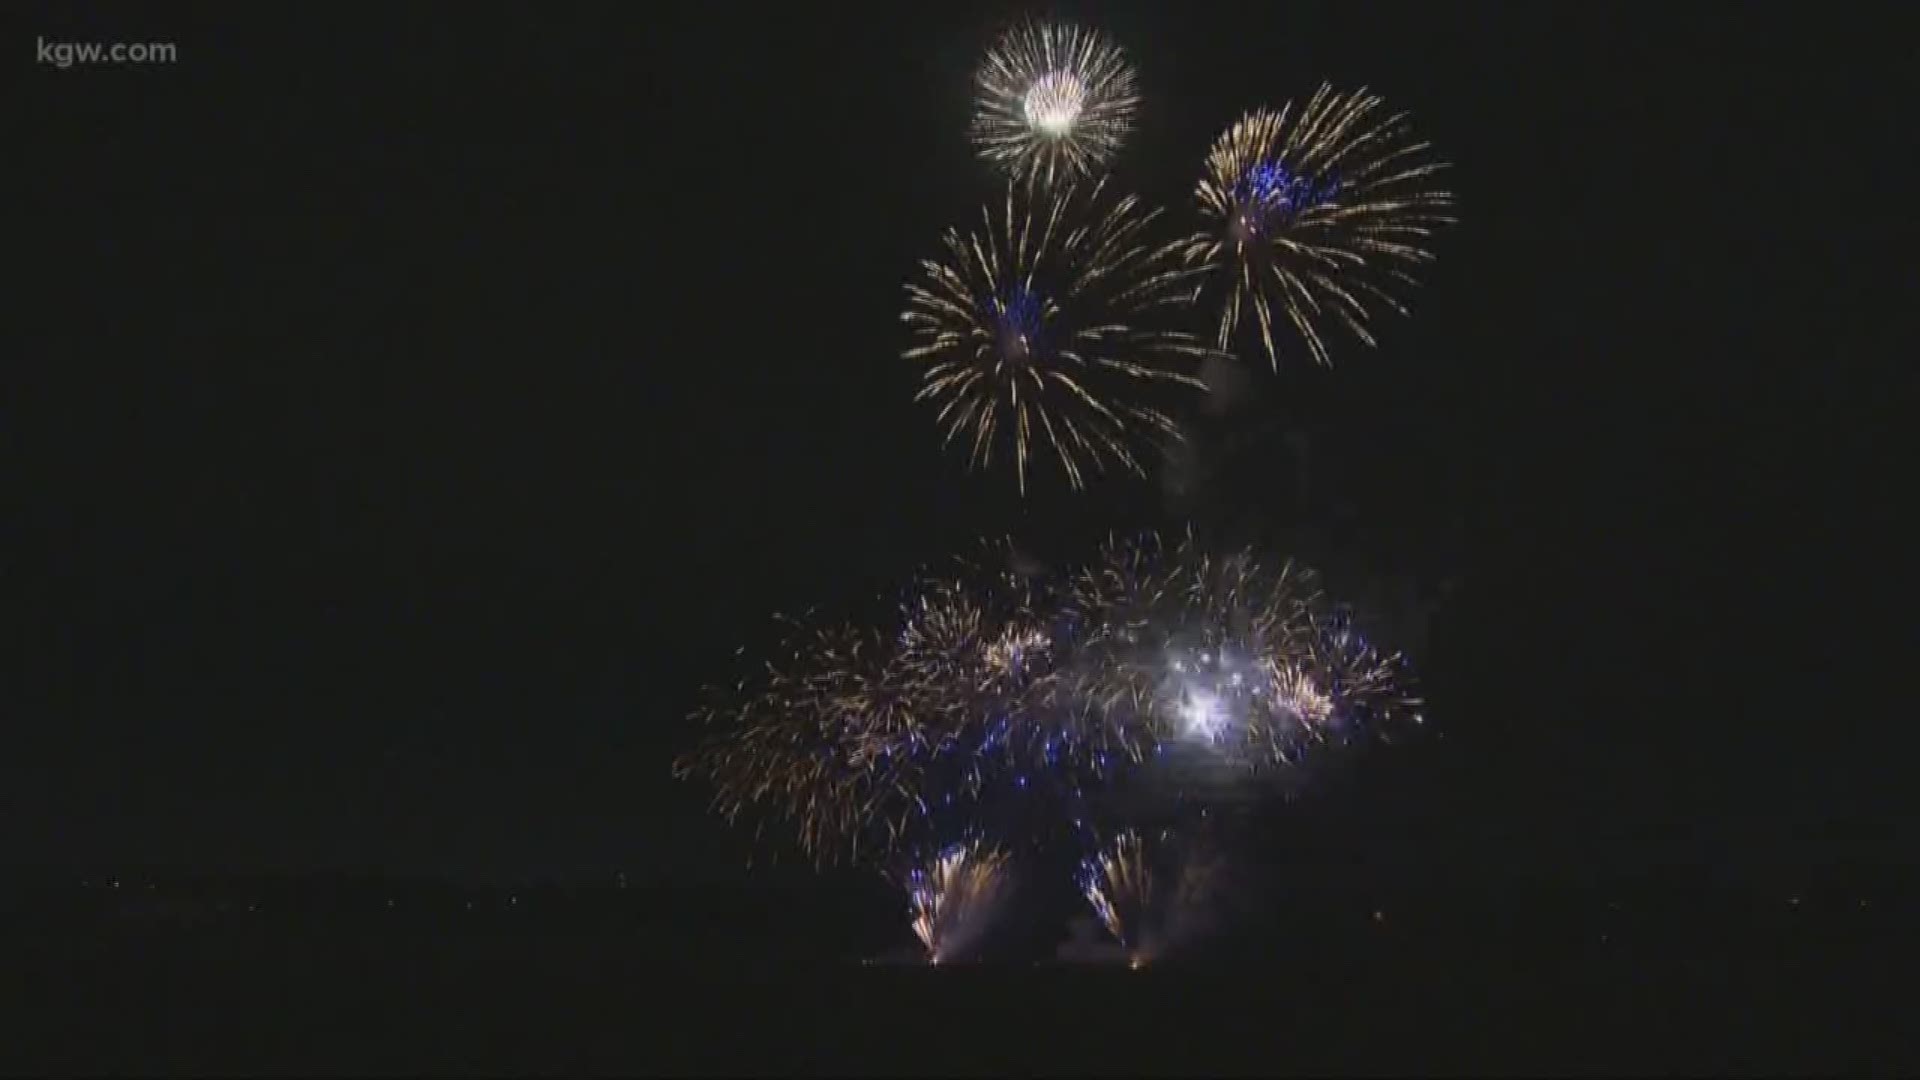 The annual Fort of Vancouver fireworks show was hyped to be the biggest in 20 years.